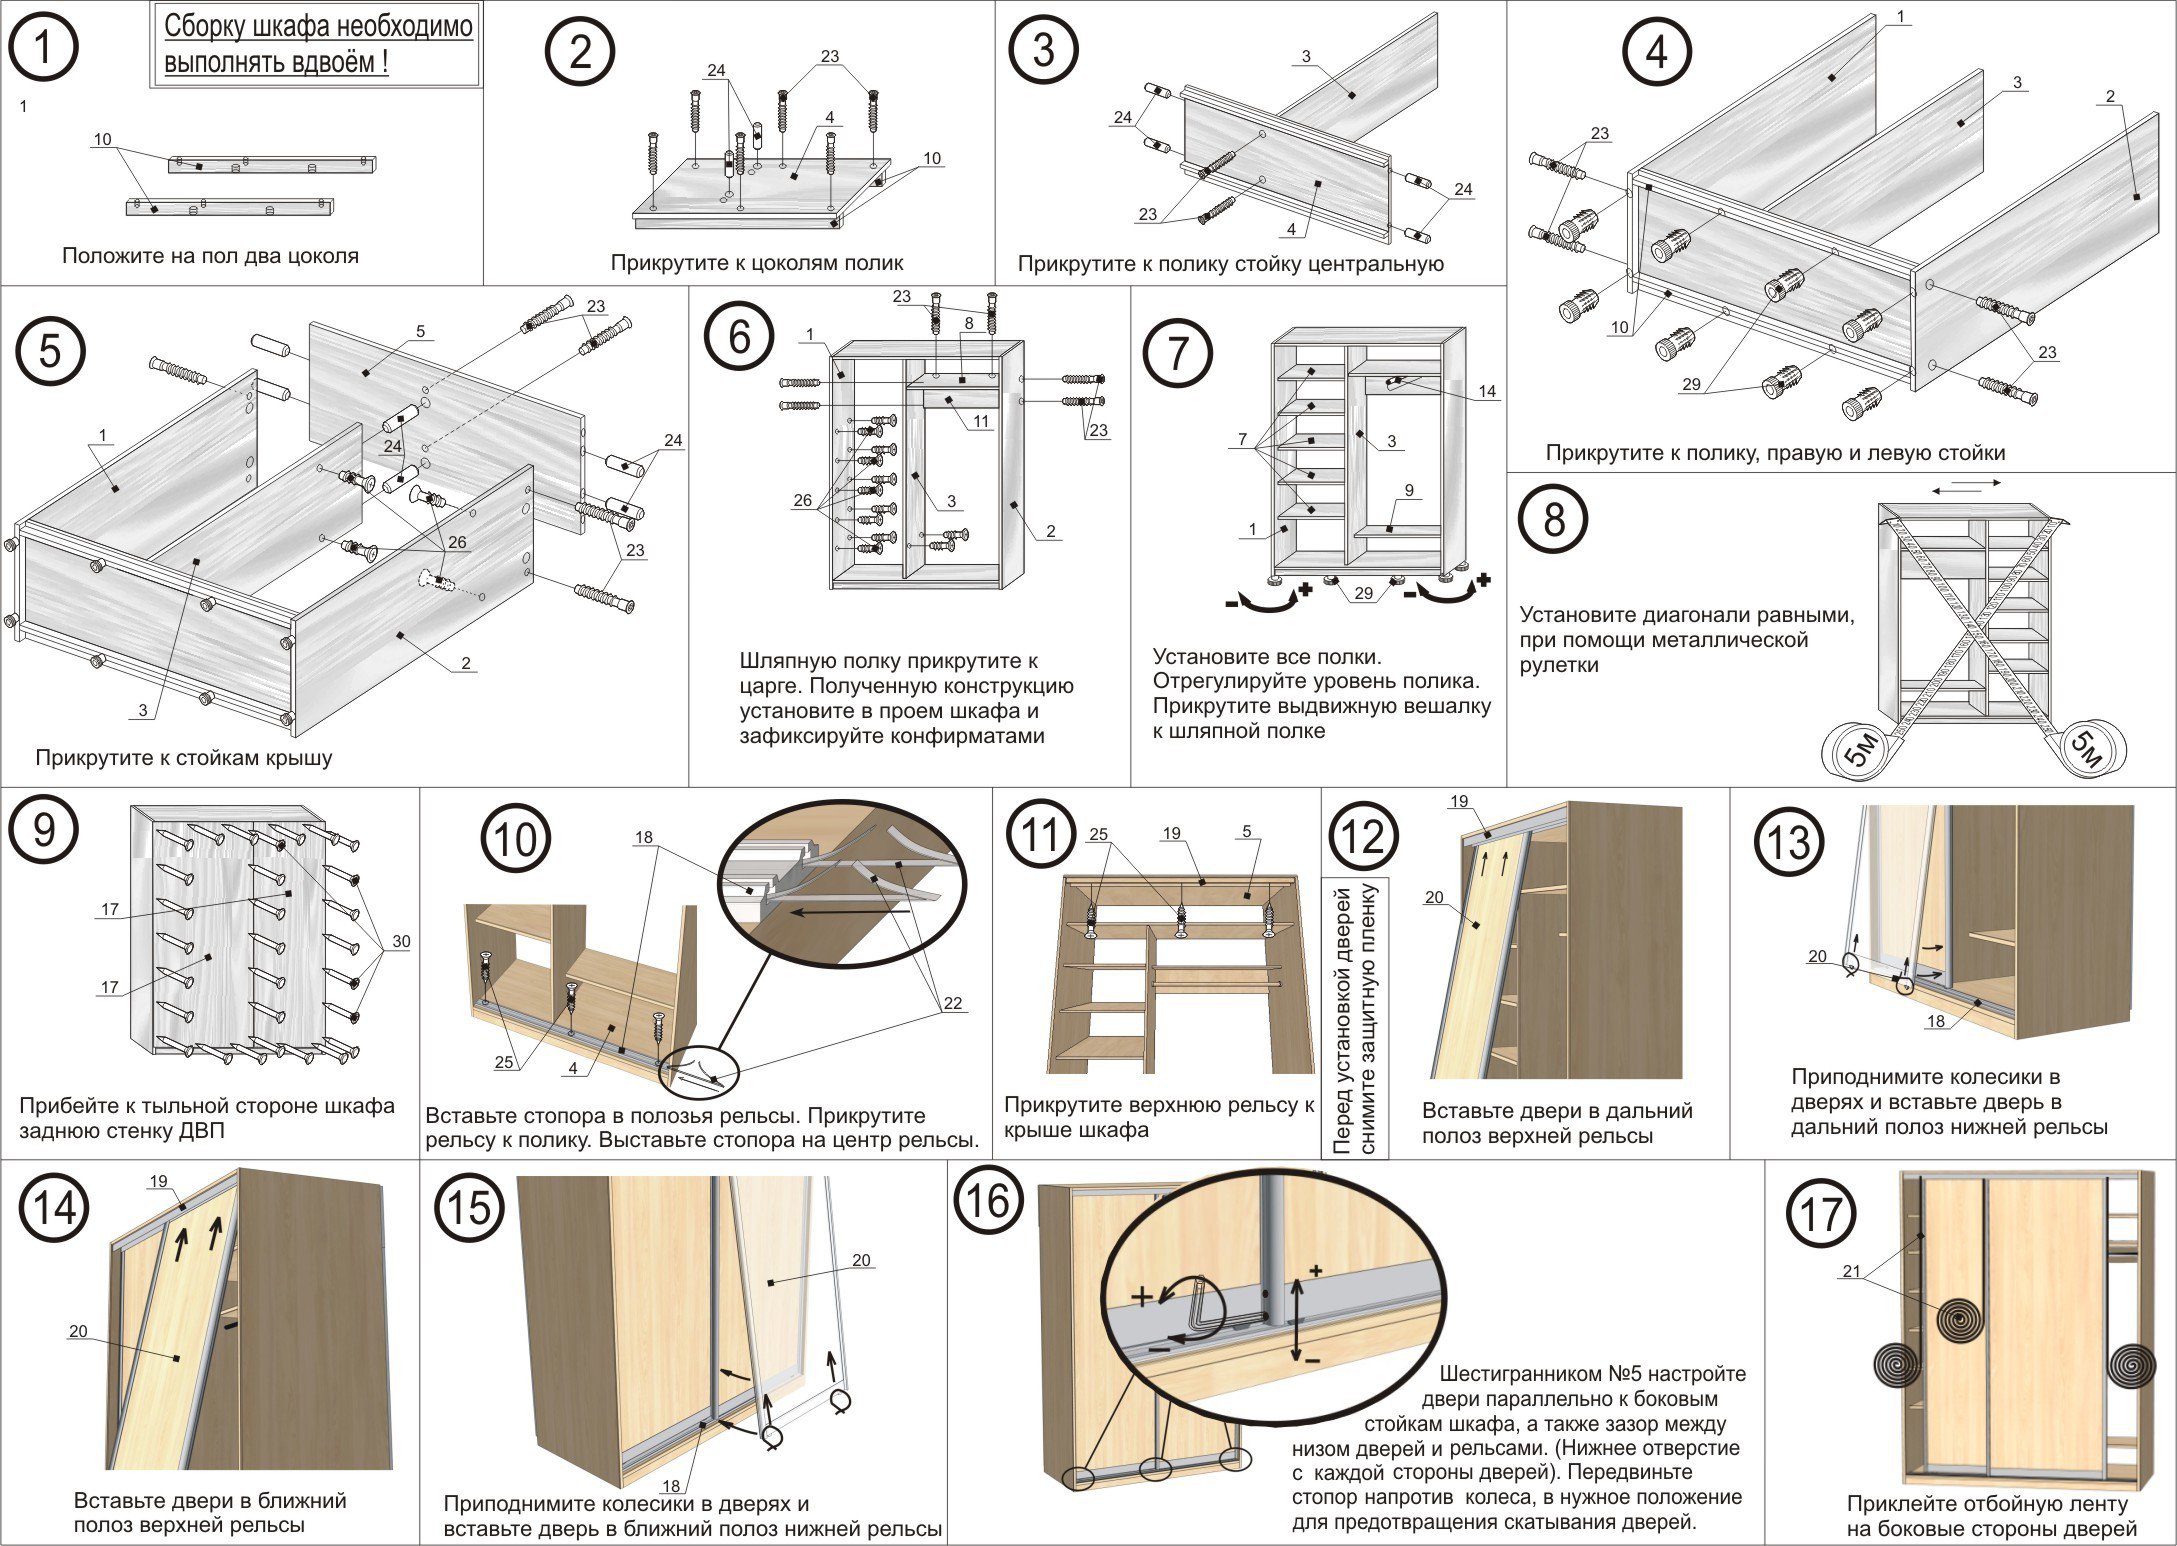 step by step instructions on how to assemble a wardrobe compartment